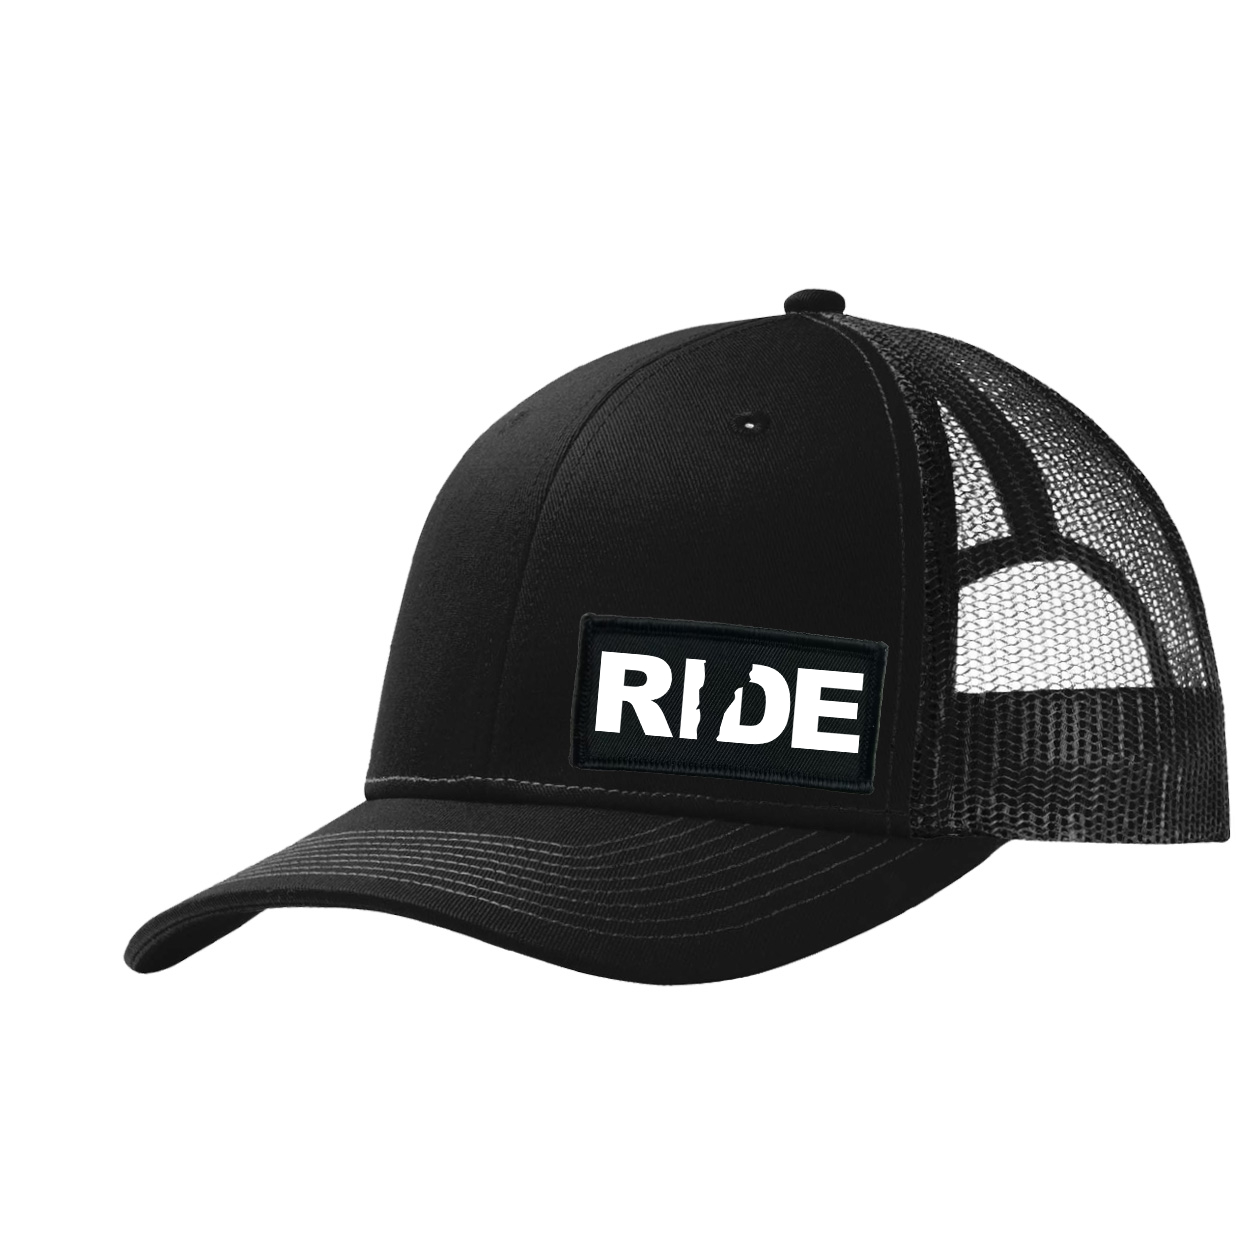 Ride Vermont Night Out Woven Patch Snapback Trucker Hat Black (White Logo)